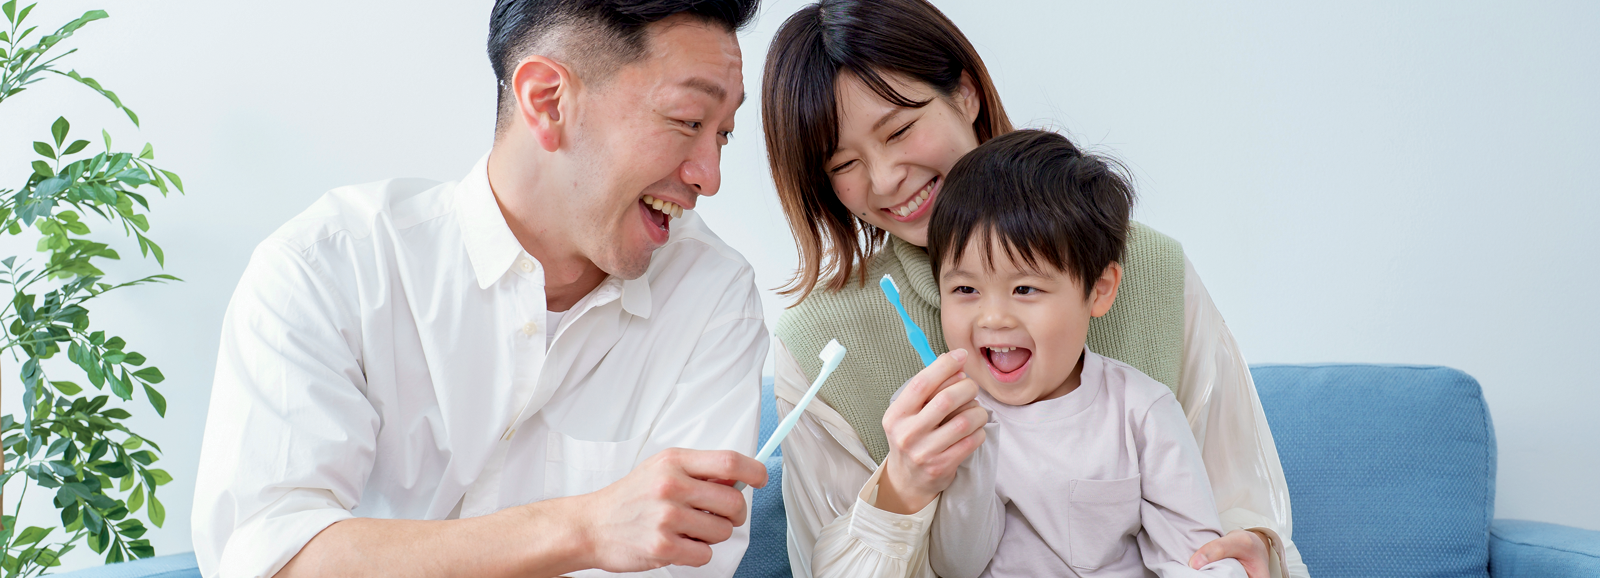 family-with-toothbrushes-1600x578.png